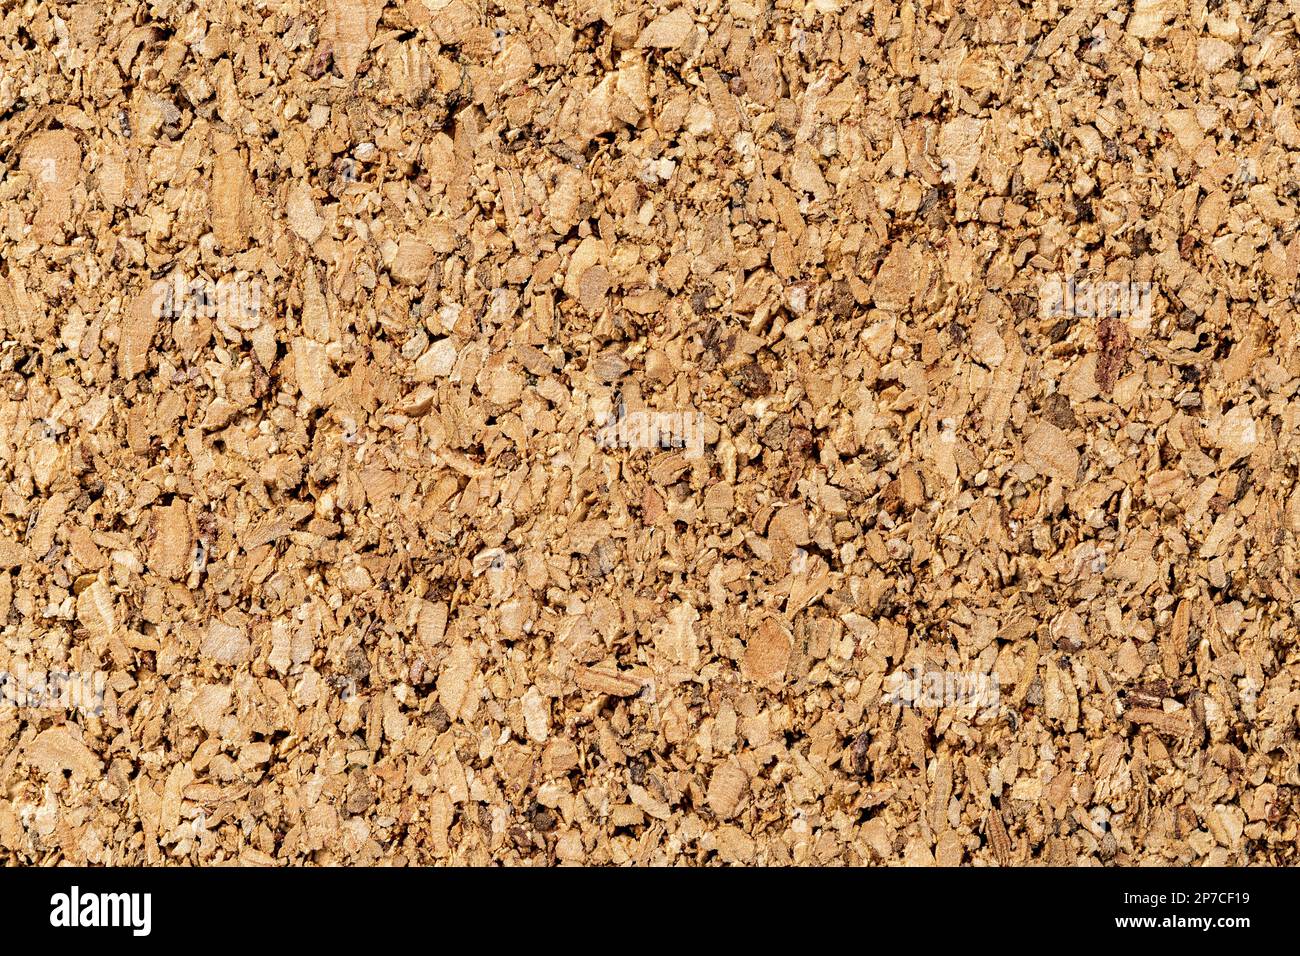 Brown cork texture macro. Background of corkboard surface for paper notes and memo stickers. Grainy wood material of the cork oak bark. Cork board. Stock Photo